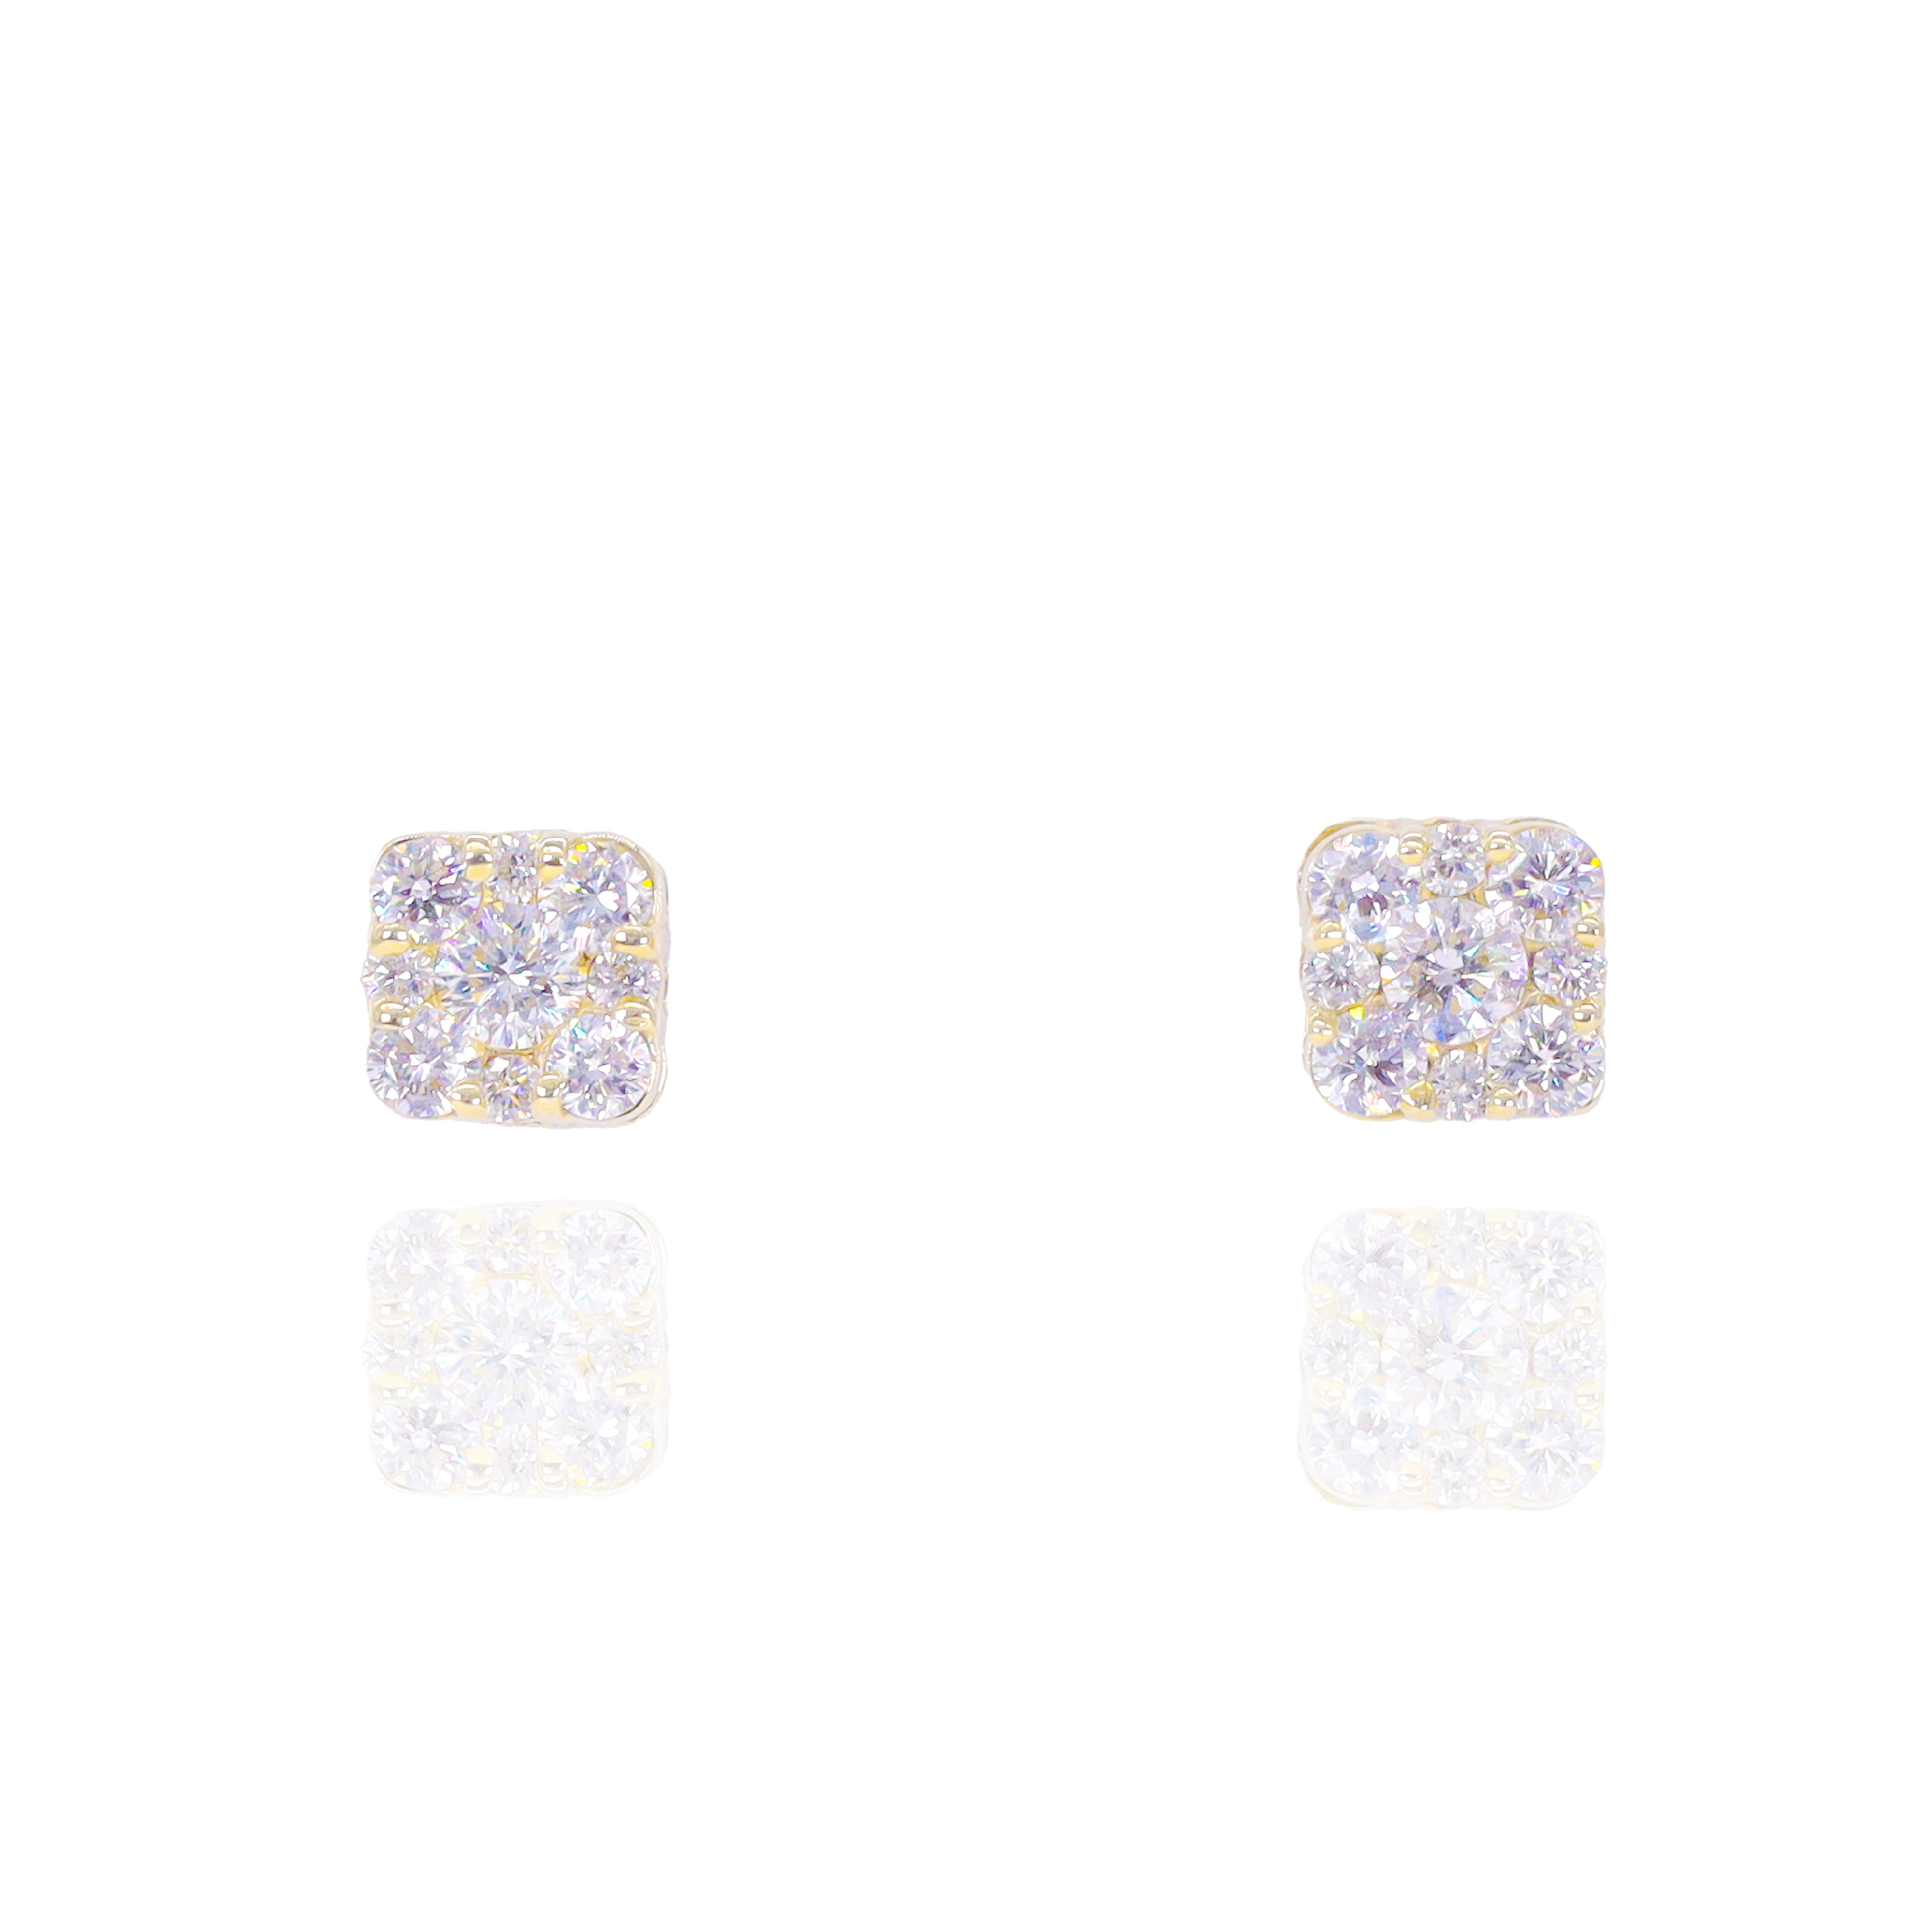 Square Solitaire Cluster Diamond Earrings